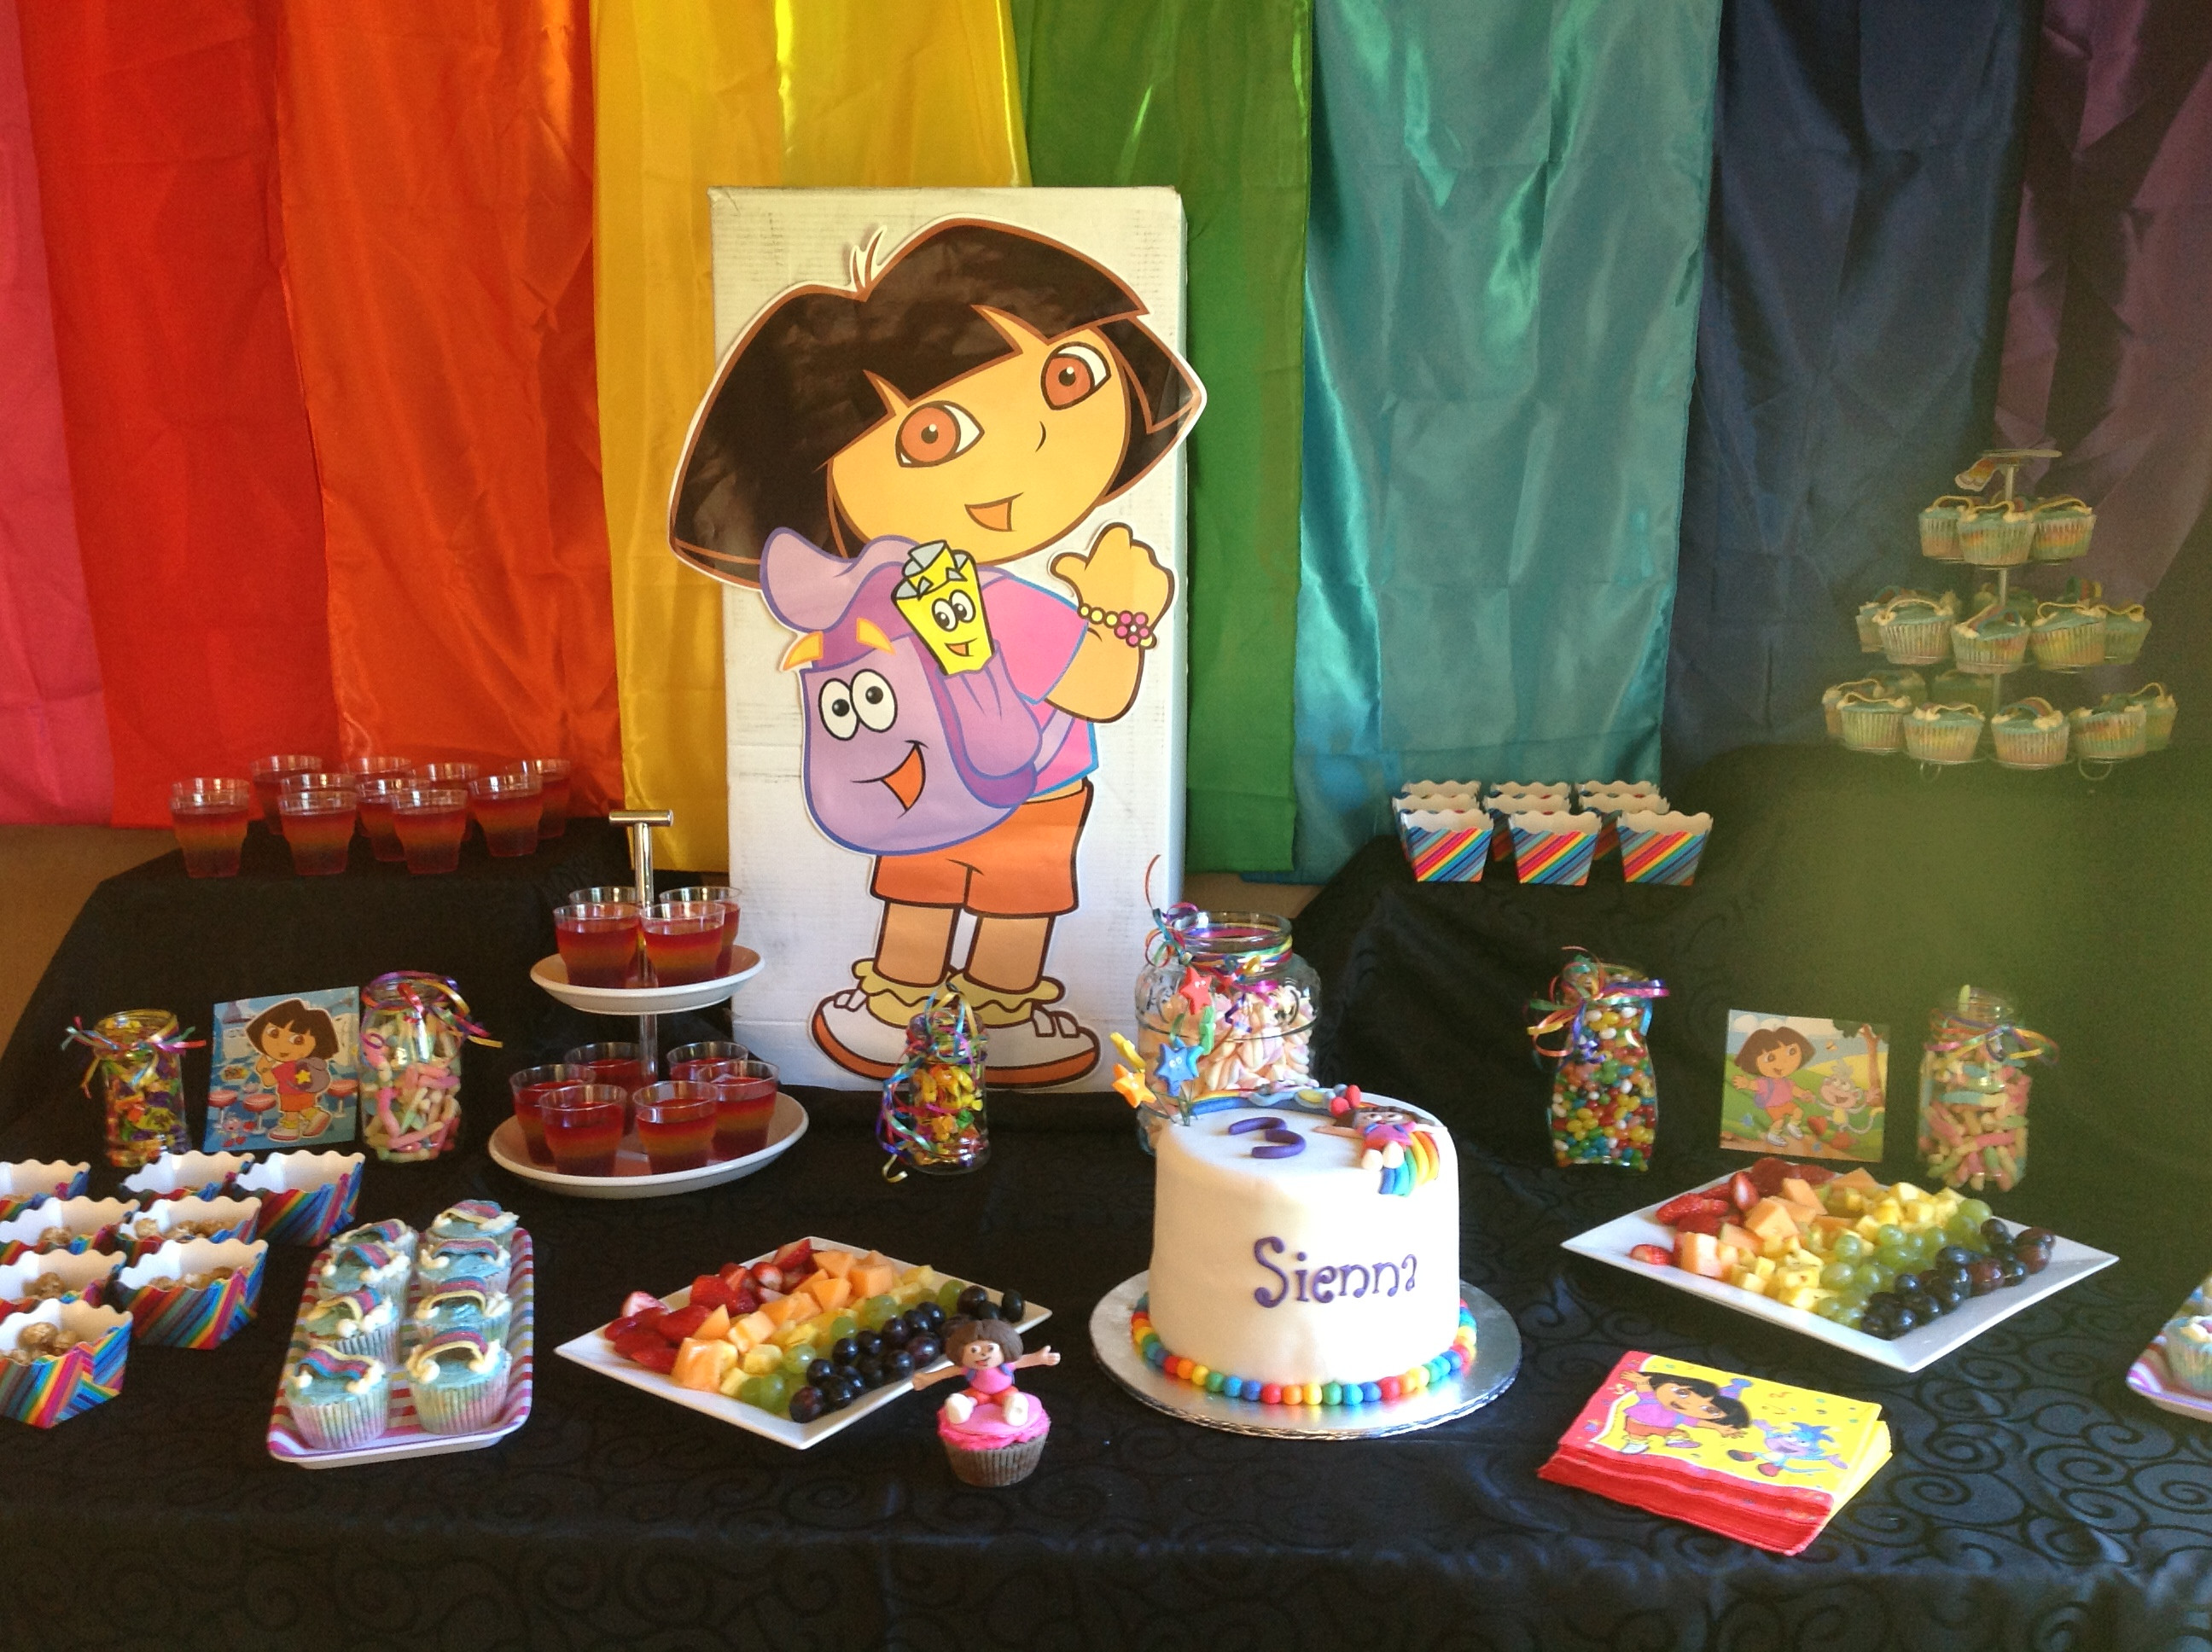 3 Yr Old Birthday Party Food Ideas
 Dora the Explorer Rainbow party for a 3 year old